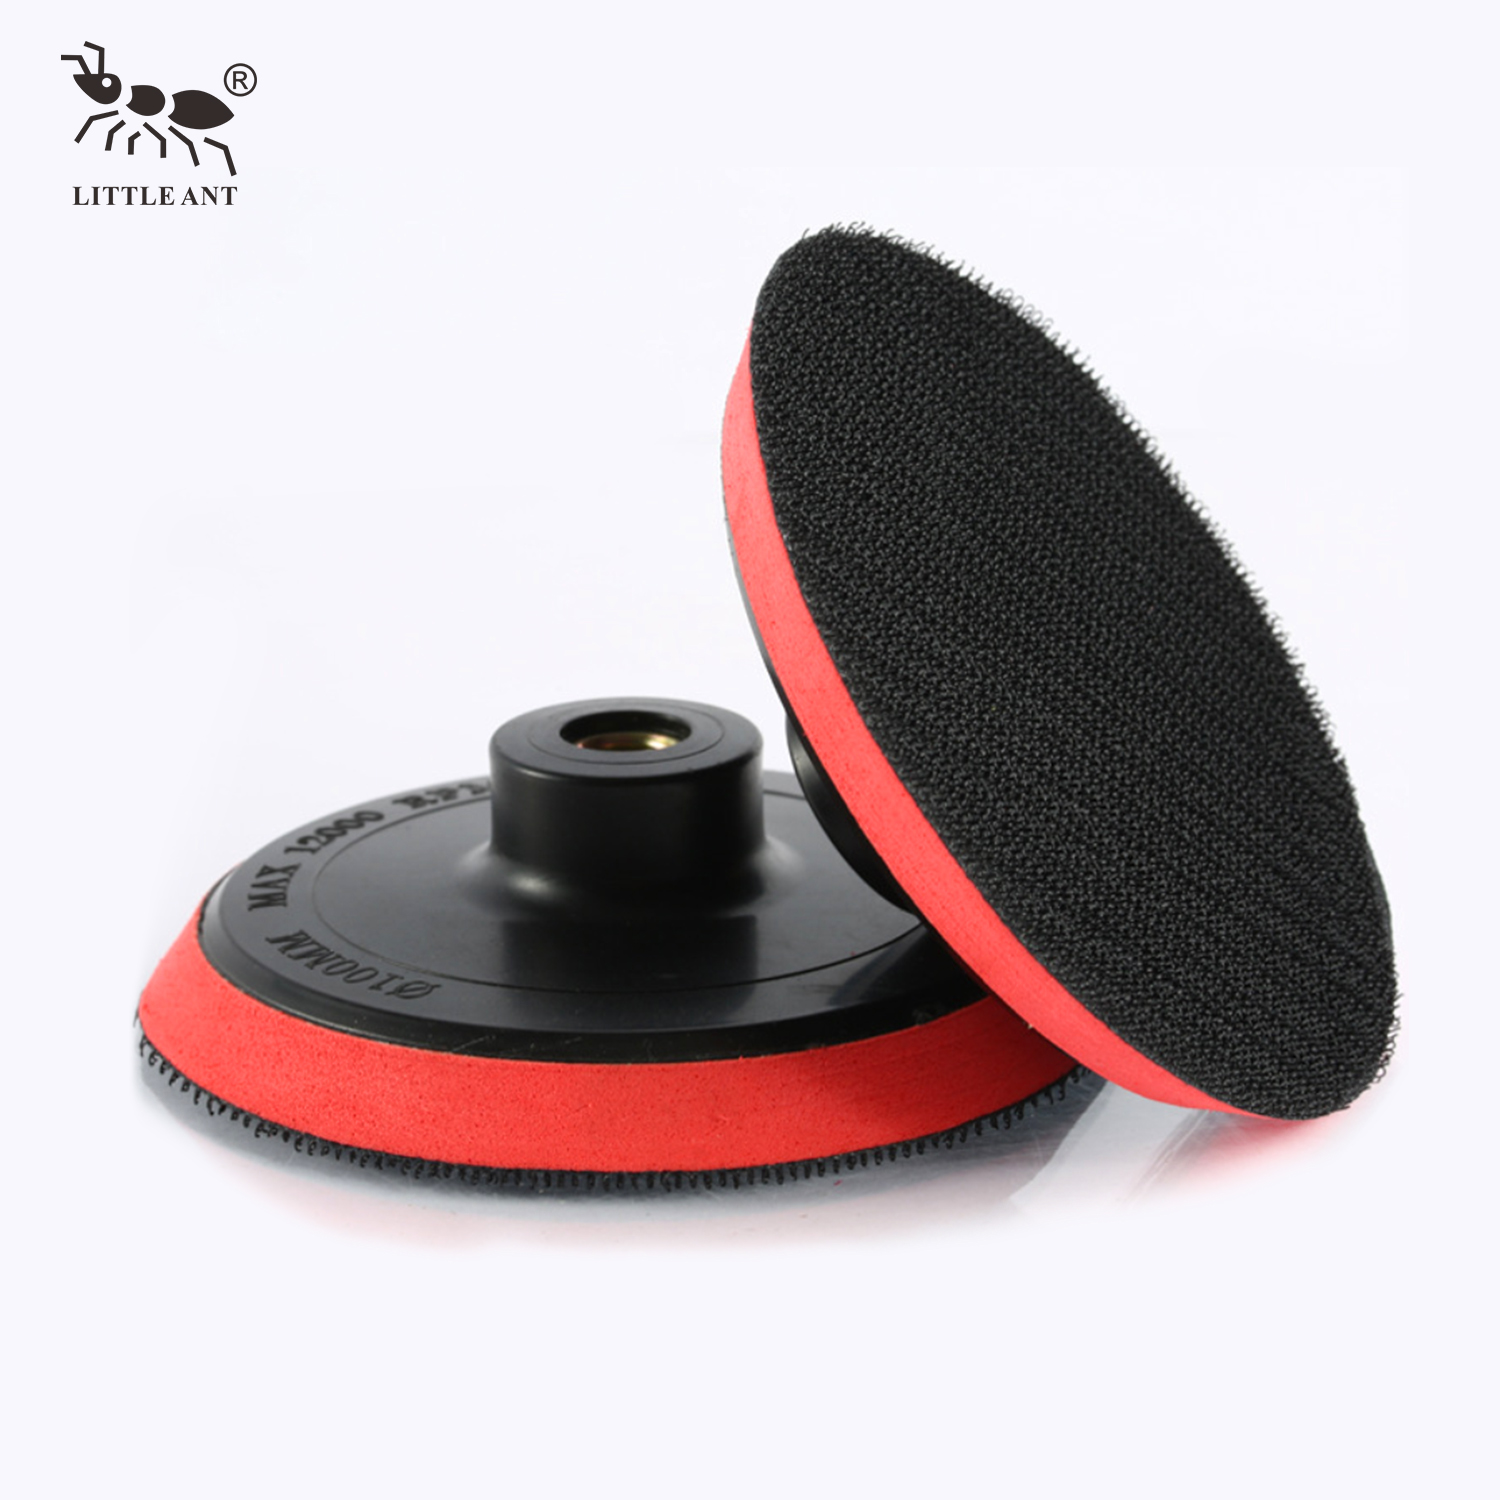 ∮100mm Backer Pad Holder Connecter Double Paste